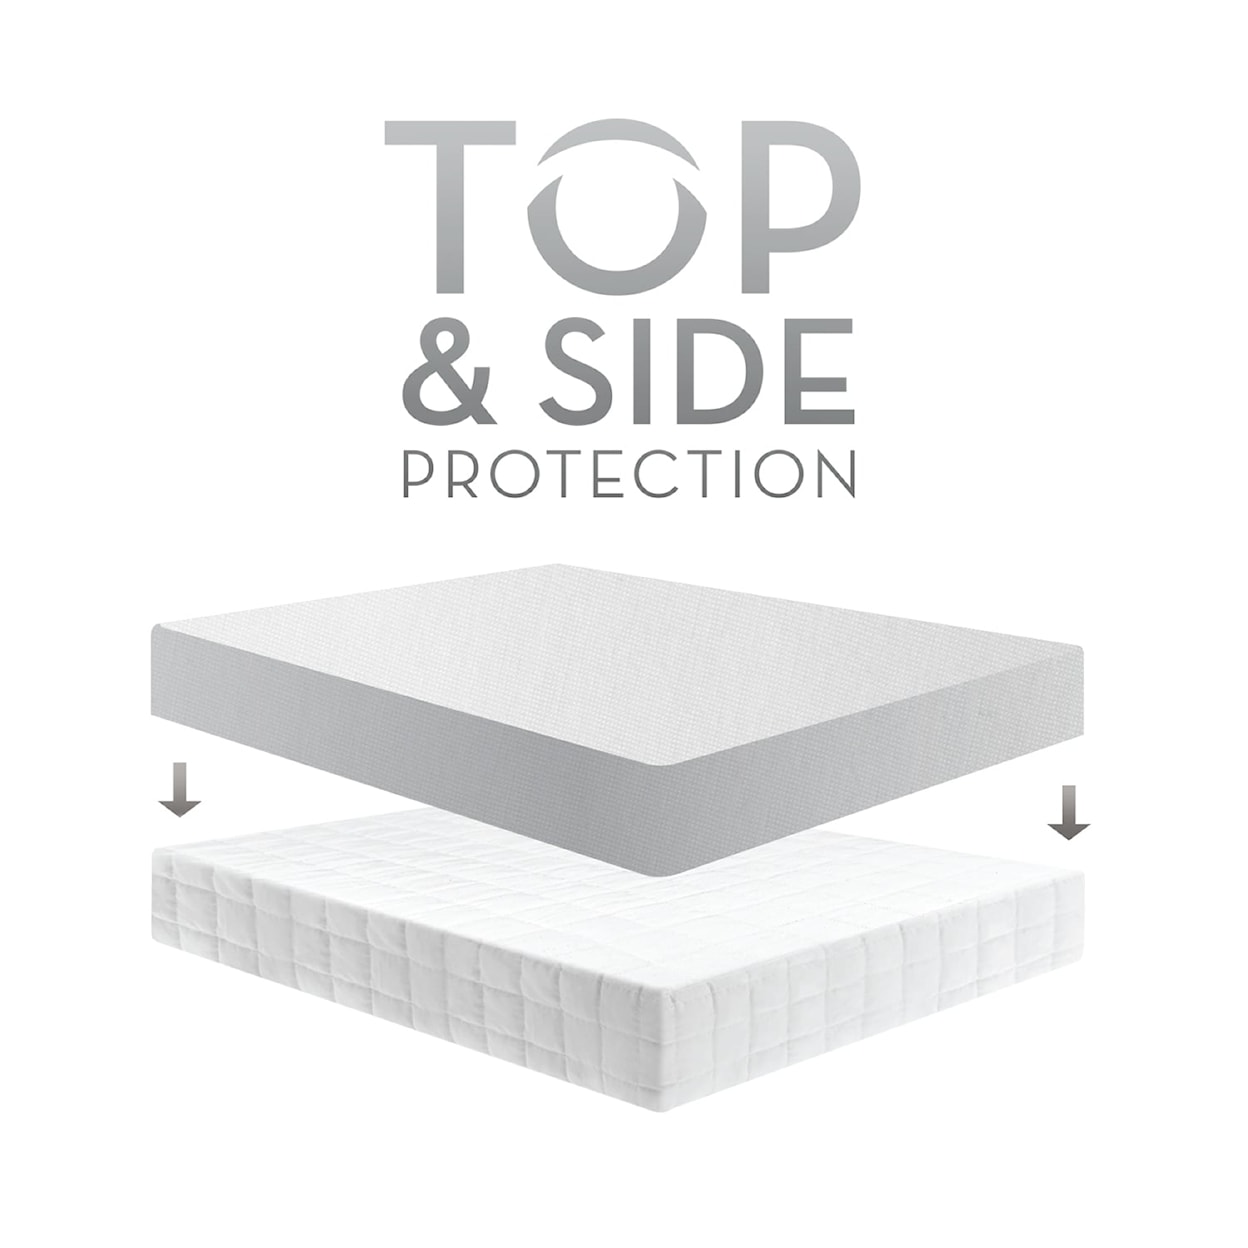 Malouf Five 5ided® Smooth Protector 5 SIDED SMOOTH KING PROTECTOR |